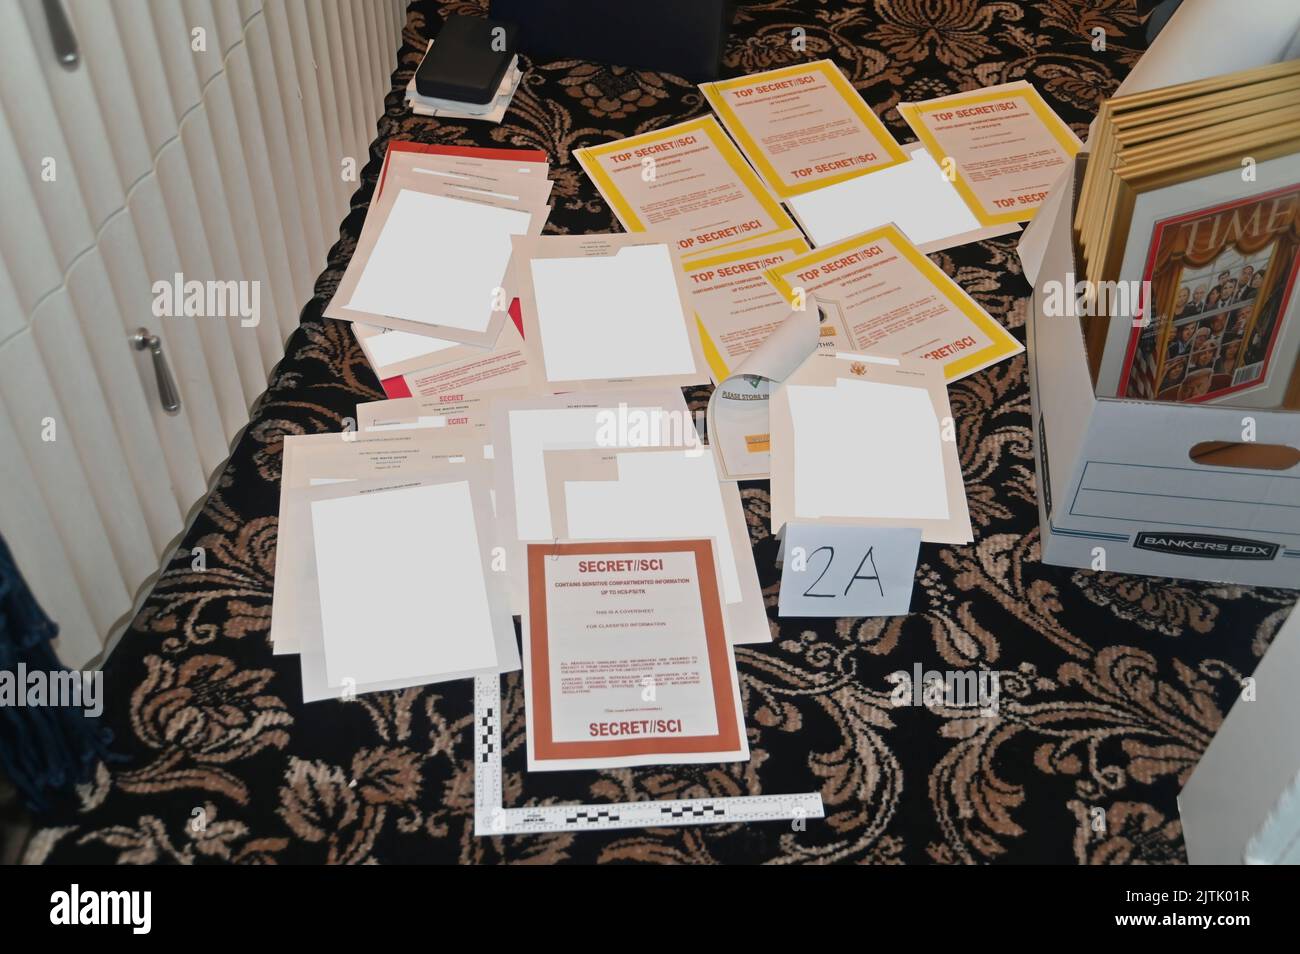 In response to a lawsuit by Donald J. Trump, the Department of Justice National Security Division and U.S. Attorney for the Southern District of Florida submitted a filing containing this image, described as 'Redacted FBI photograph of certain documents and classified cover sheets recovered from a container in the '45 office'.' The '45 office' refers to the office of former US President Donald Trump. On August 8, 2022, the Federal Bureau of Investigation (FBI) executed a search warrant at Mar-a-Lago, the Palm Beach, Florida, residence of former U.S. president Donald Trump. Stock Photo